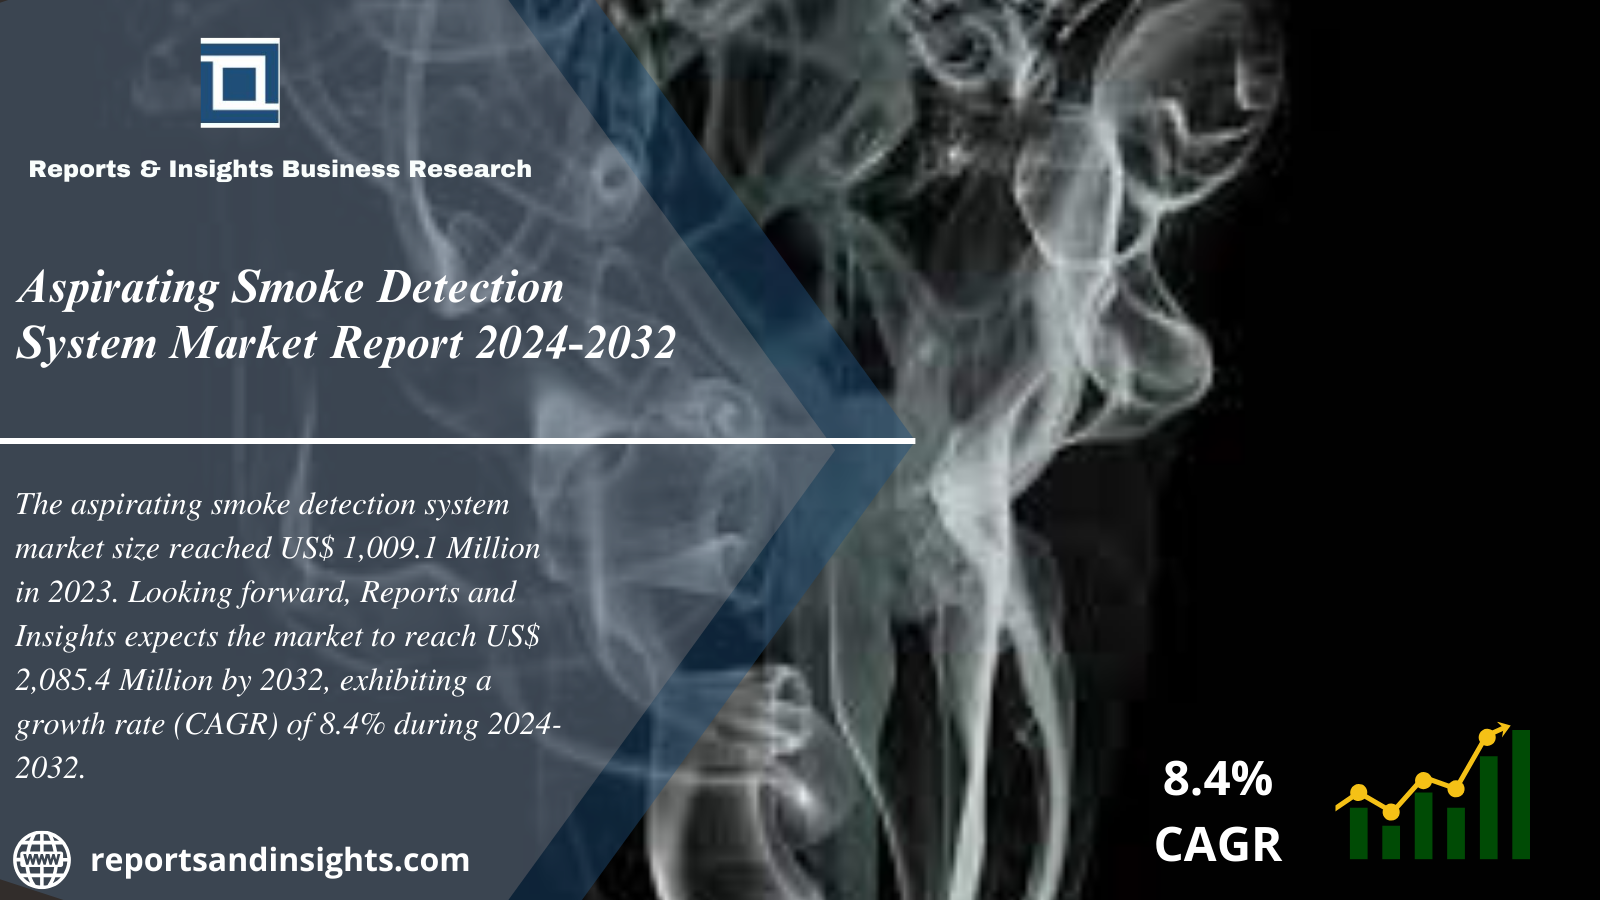 Aspirating Smoke Detection System Market 2024-2032: Trends, Share, Size, Growth and Leading Key Players